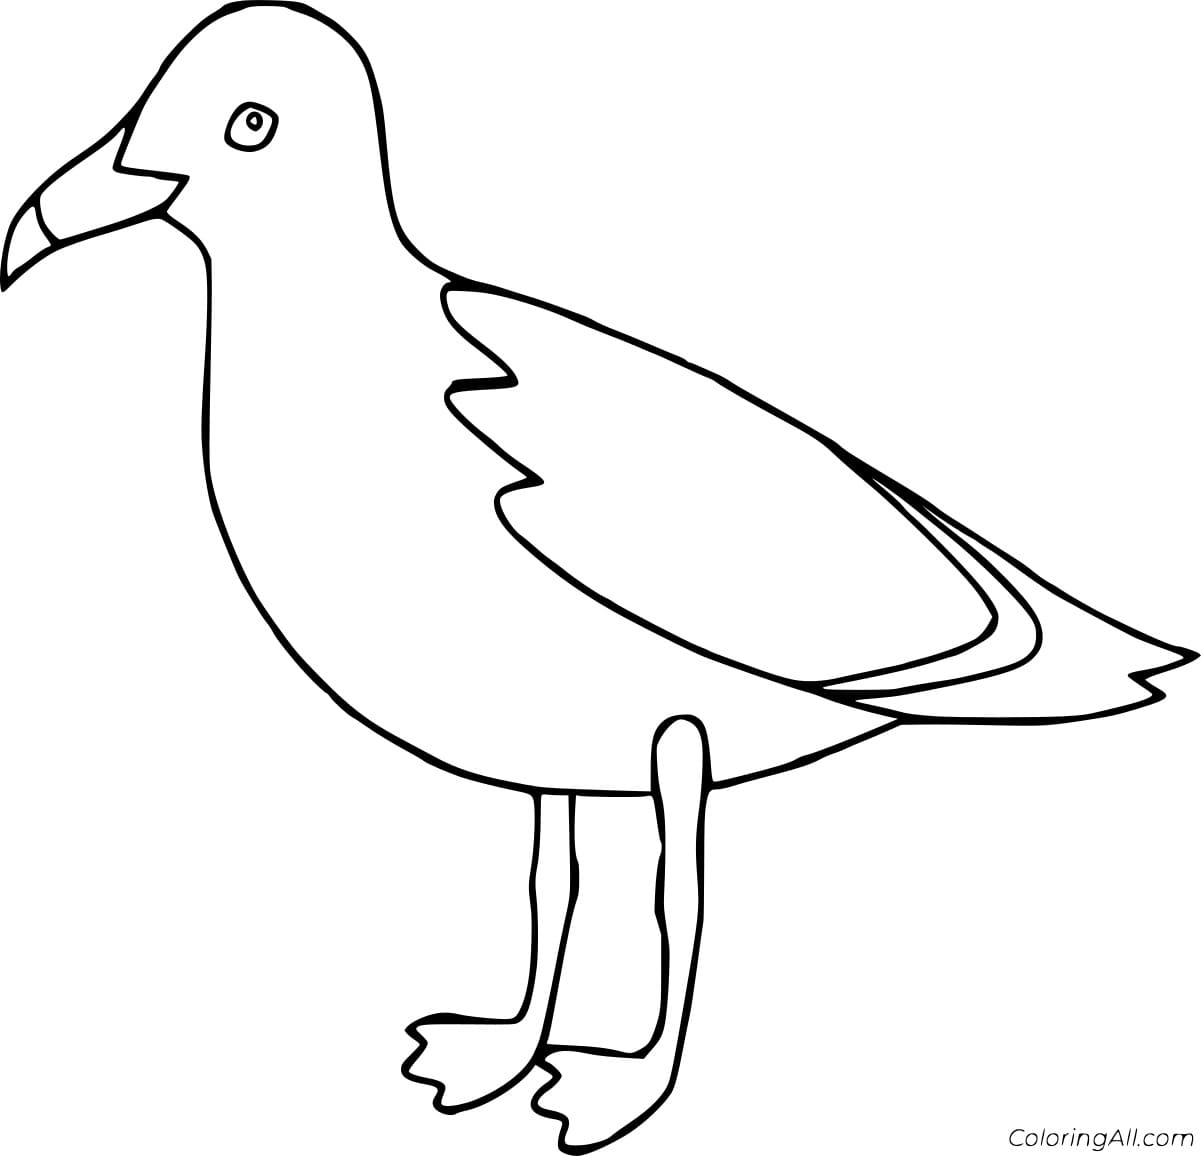 California Gull Coloring Page